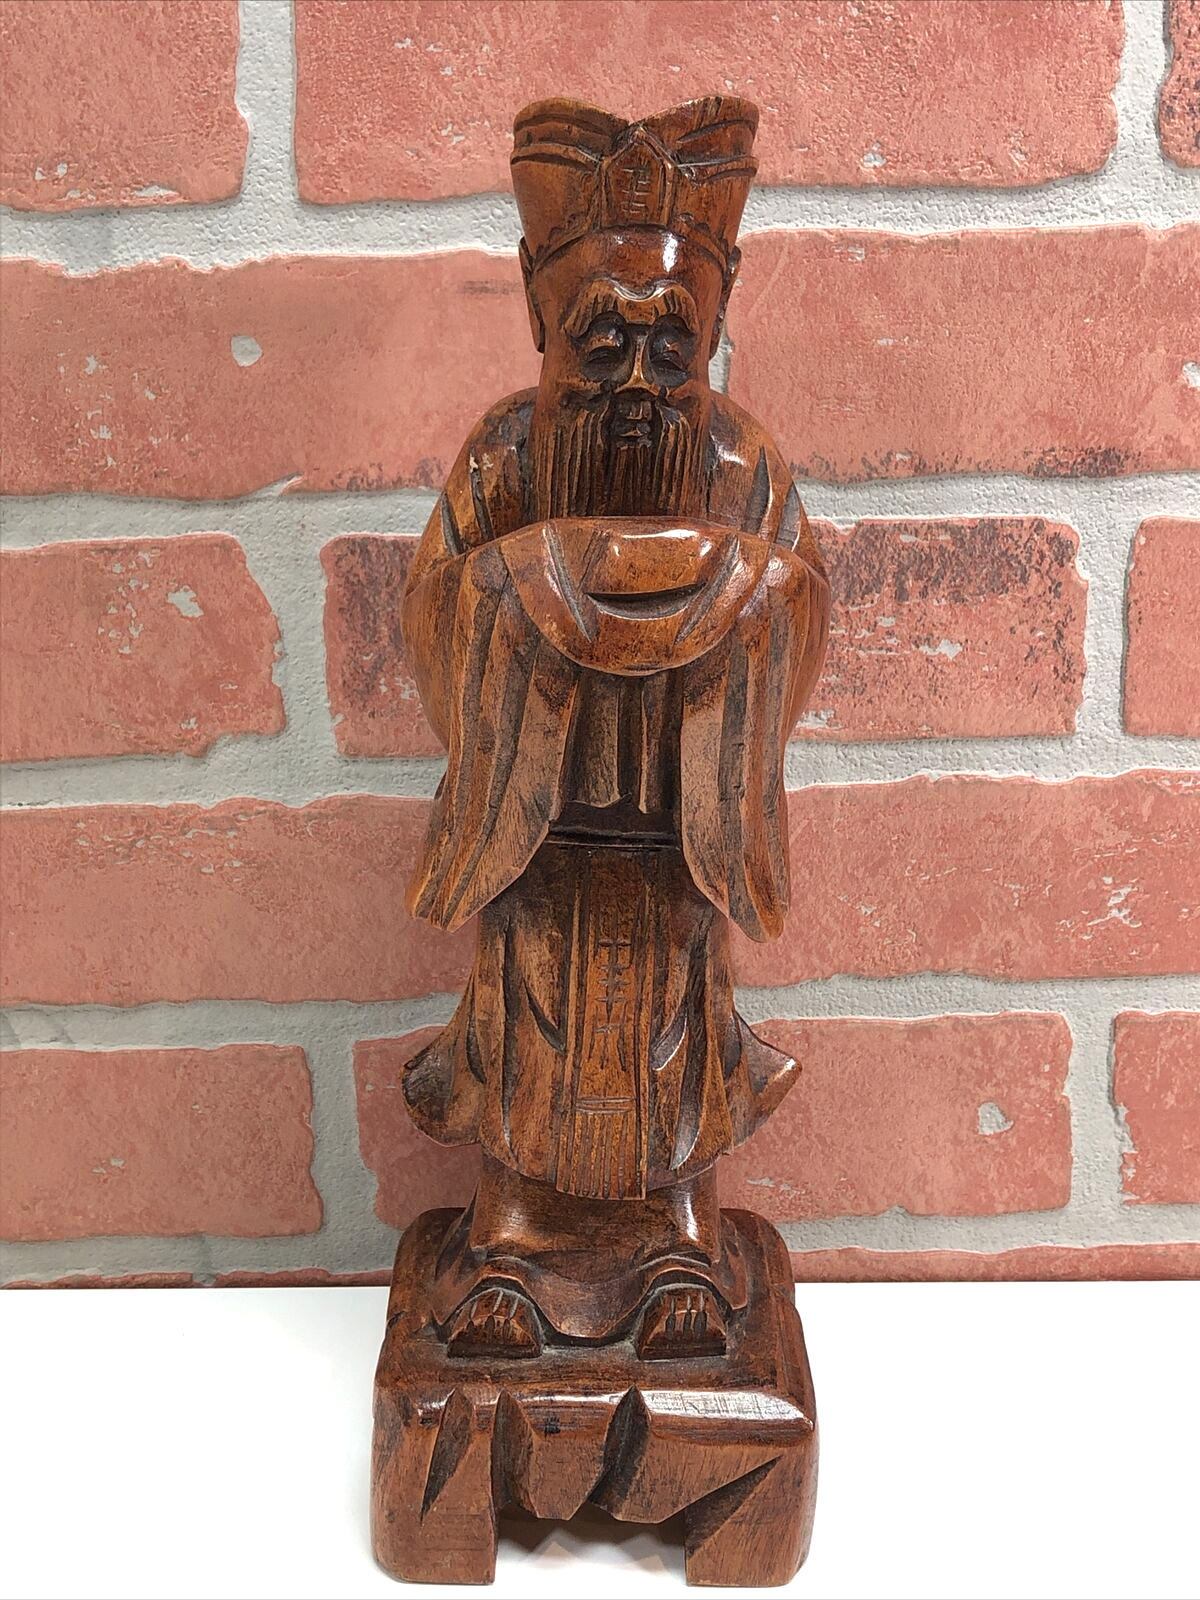 12” Chinese Carved Wood Figure Sculpture Confucius Republic of China Buddha